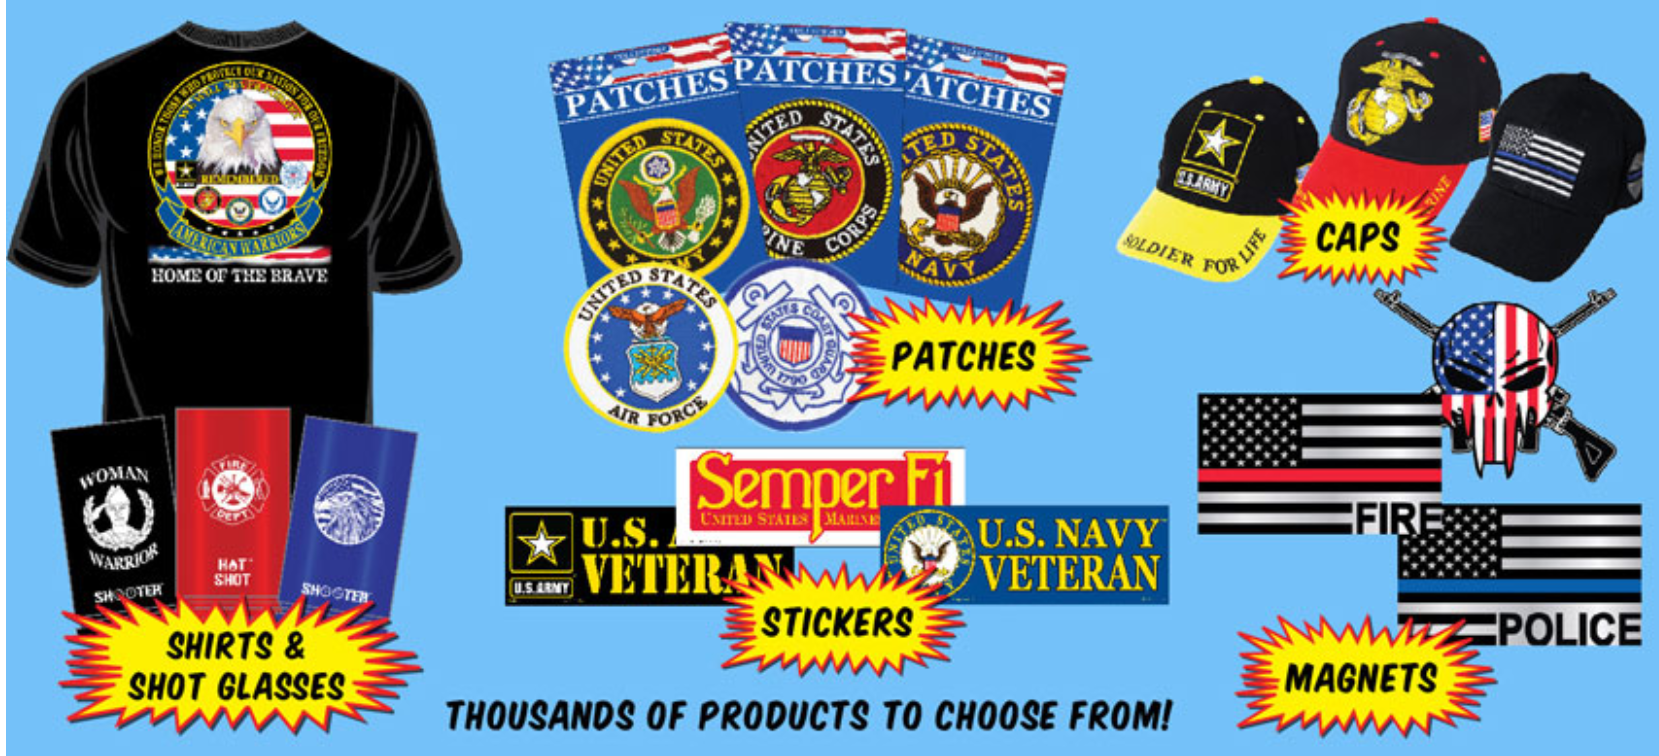 T-shirts, bumper stickers, hat pins and hats with military insignia